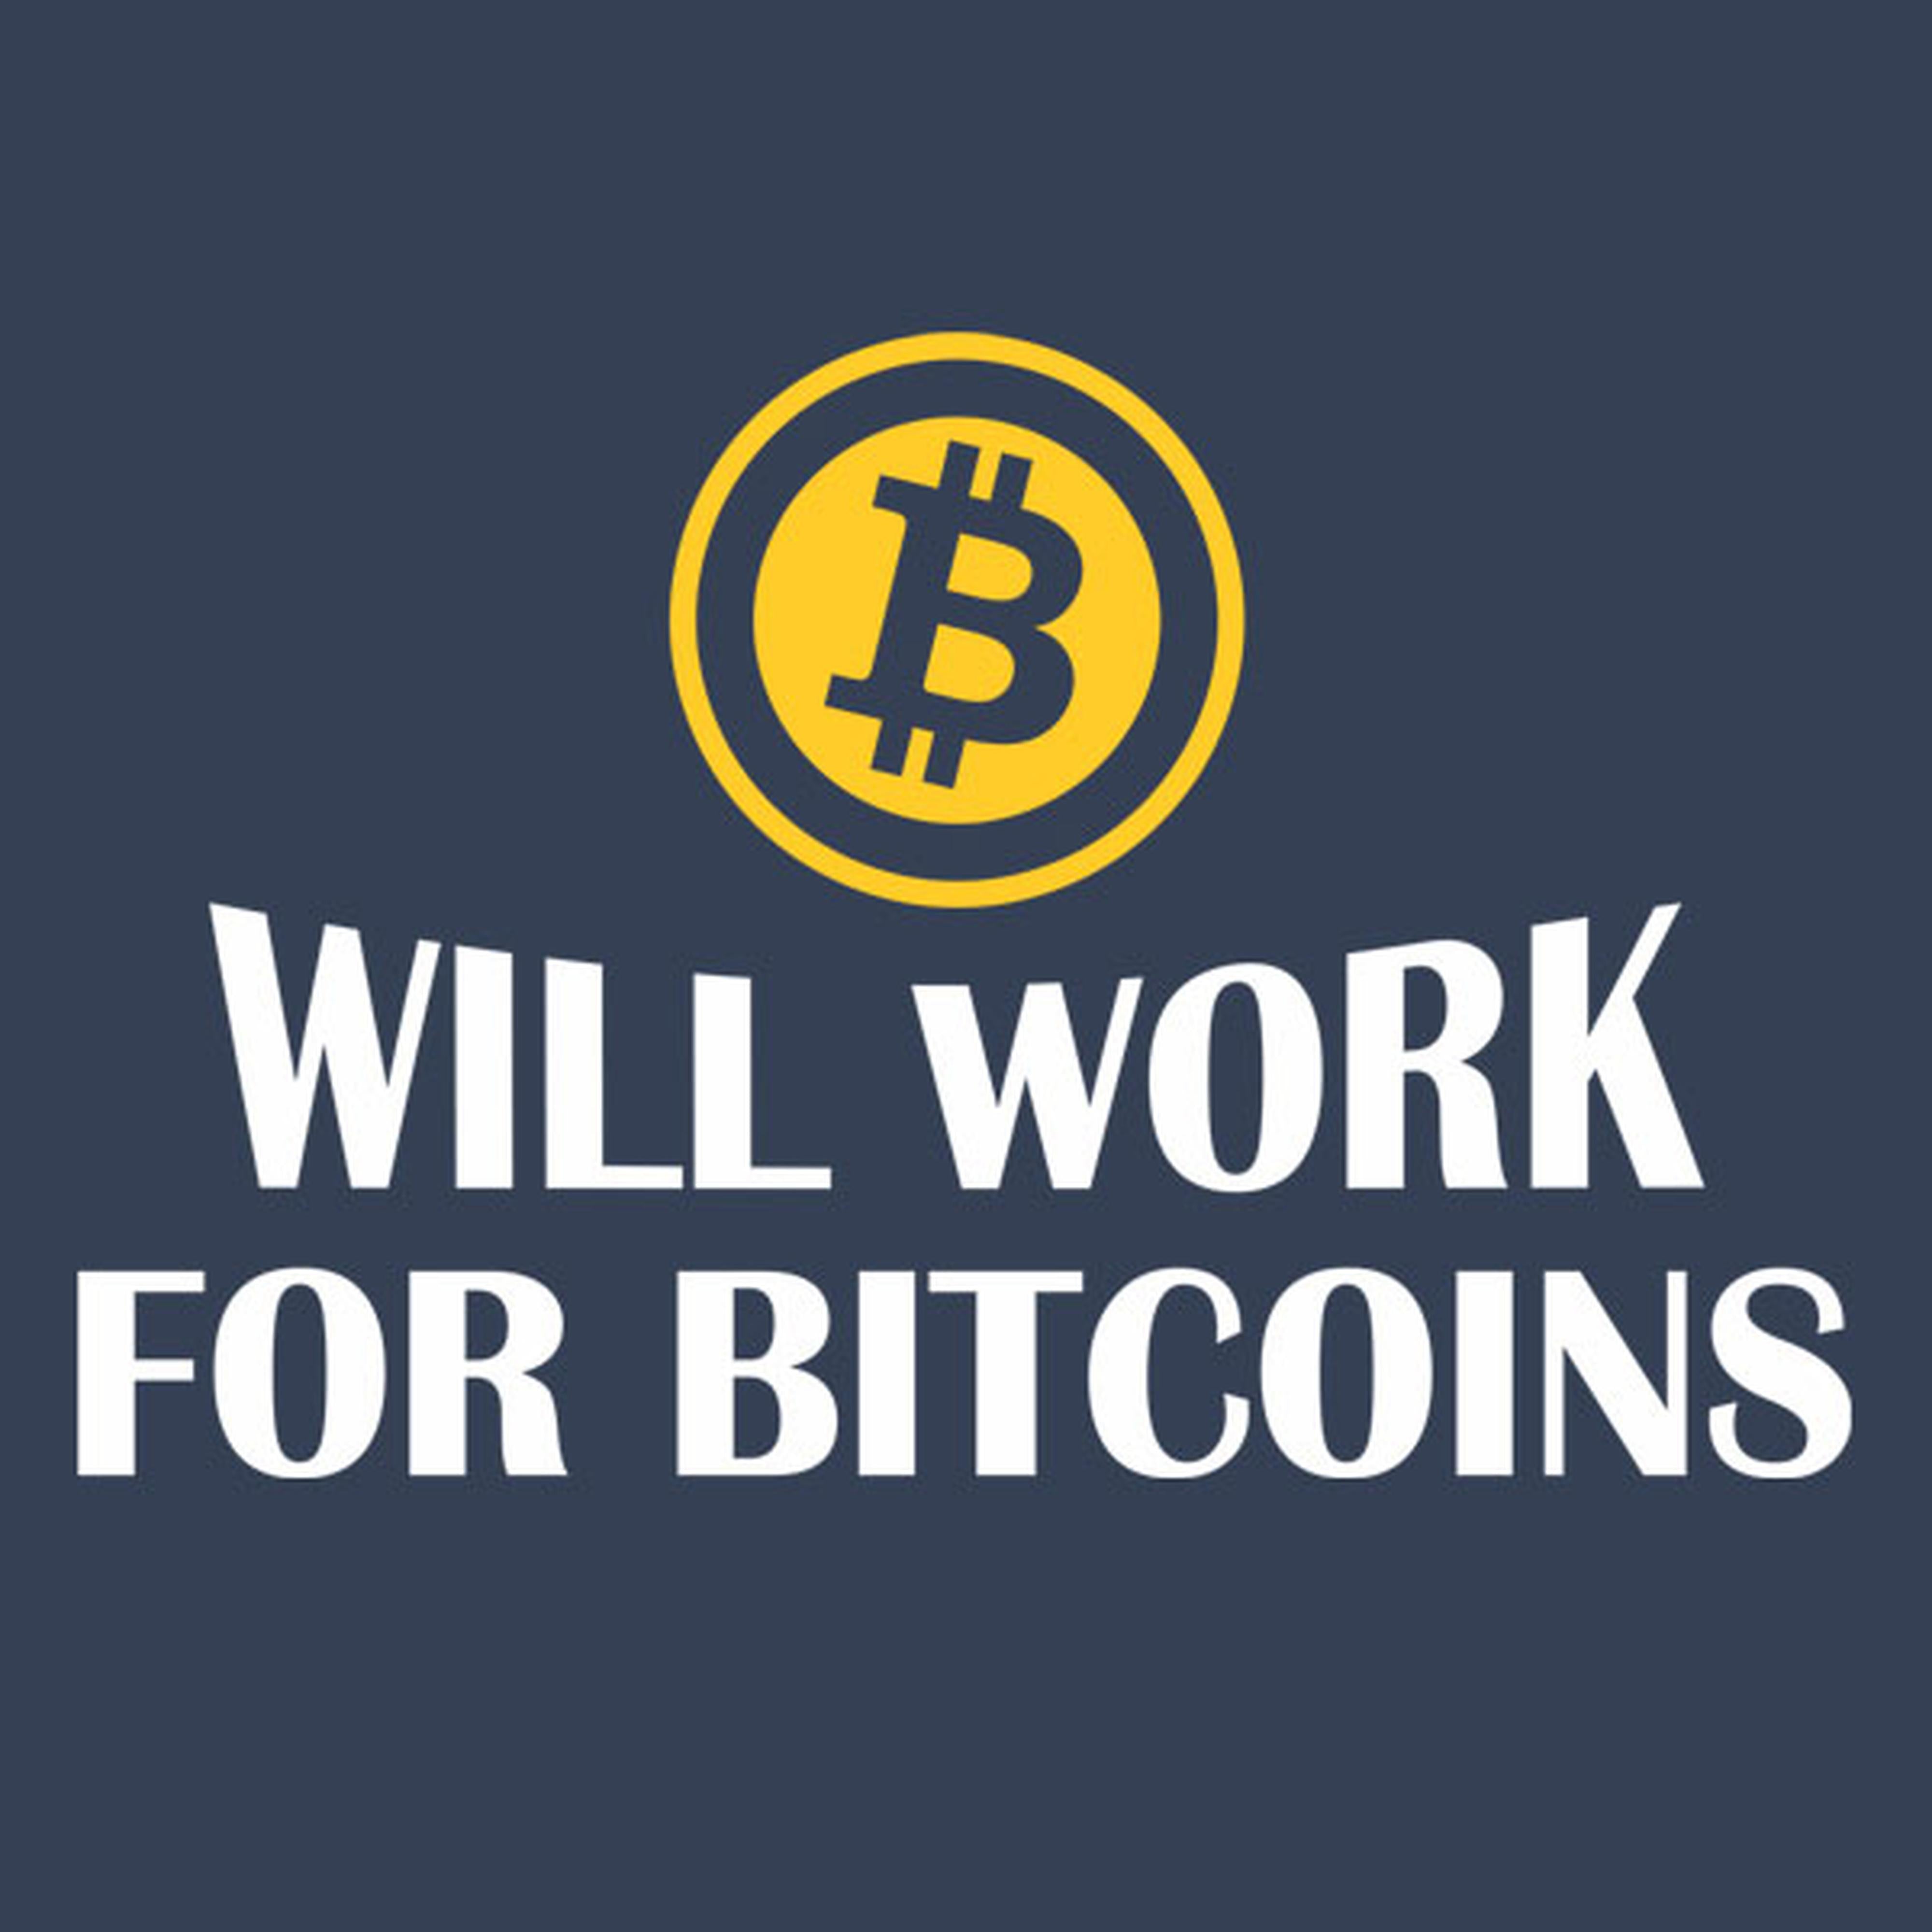 Will work for bitcoins - T-shirt